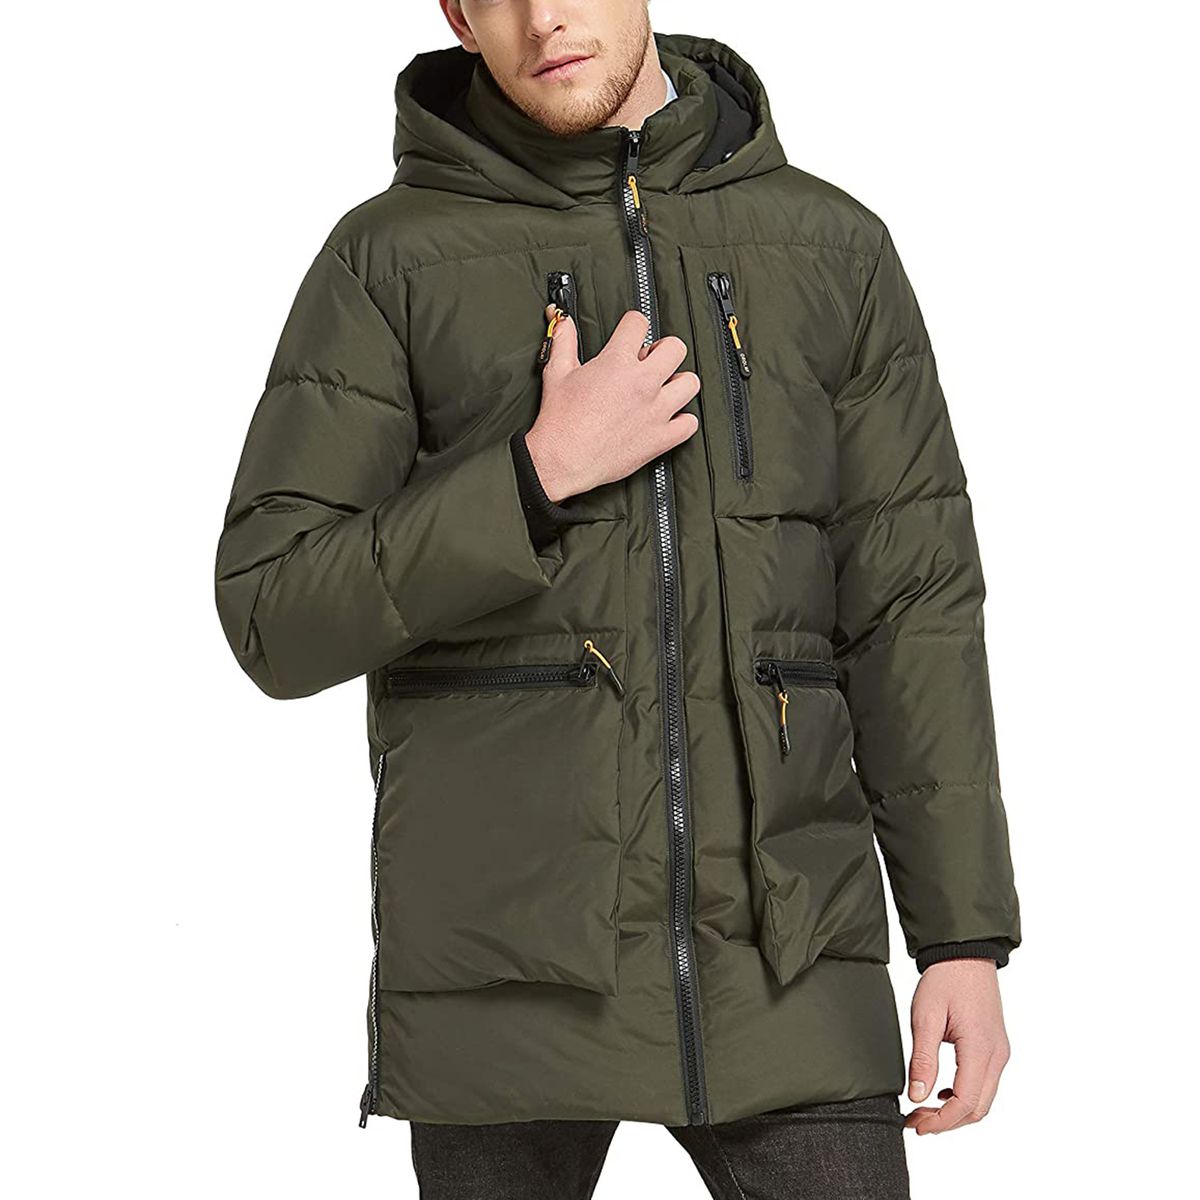 The 17 Best Winter Jackets and Coats for Men, According to Reviews ...